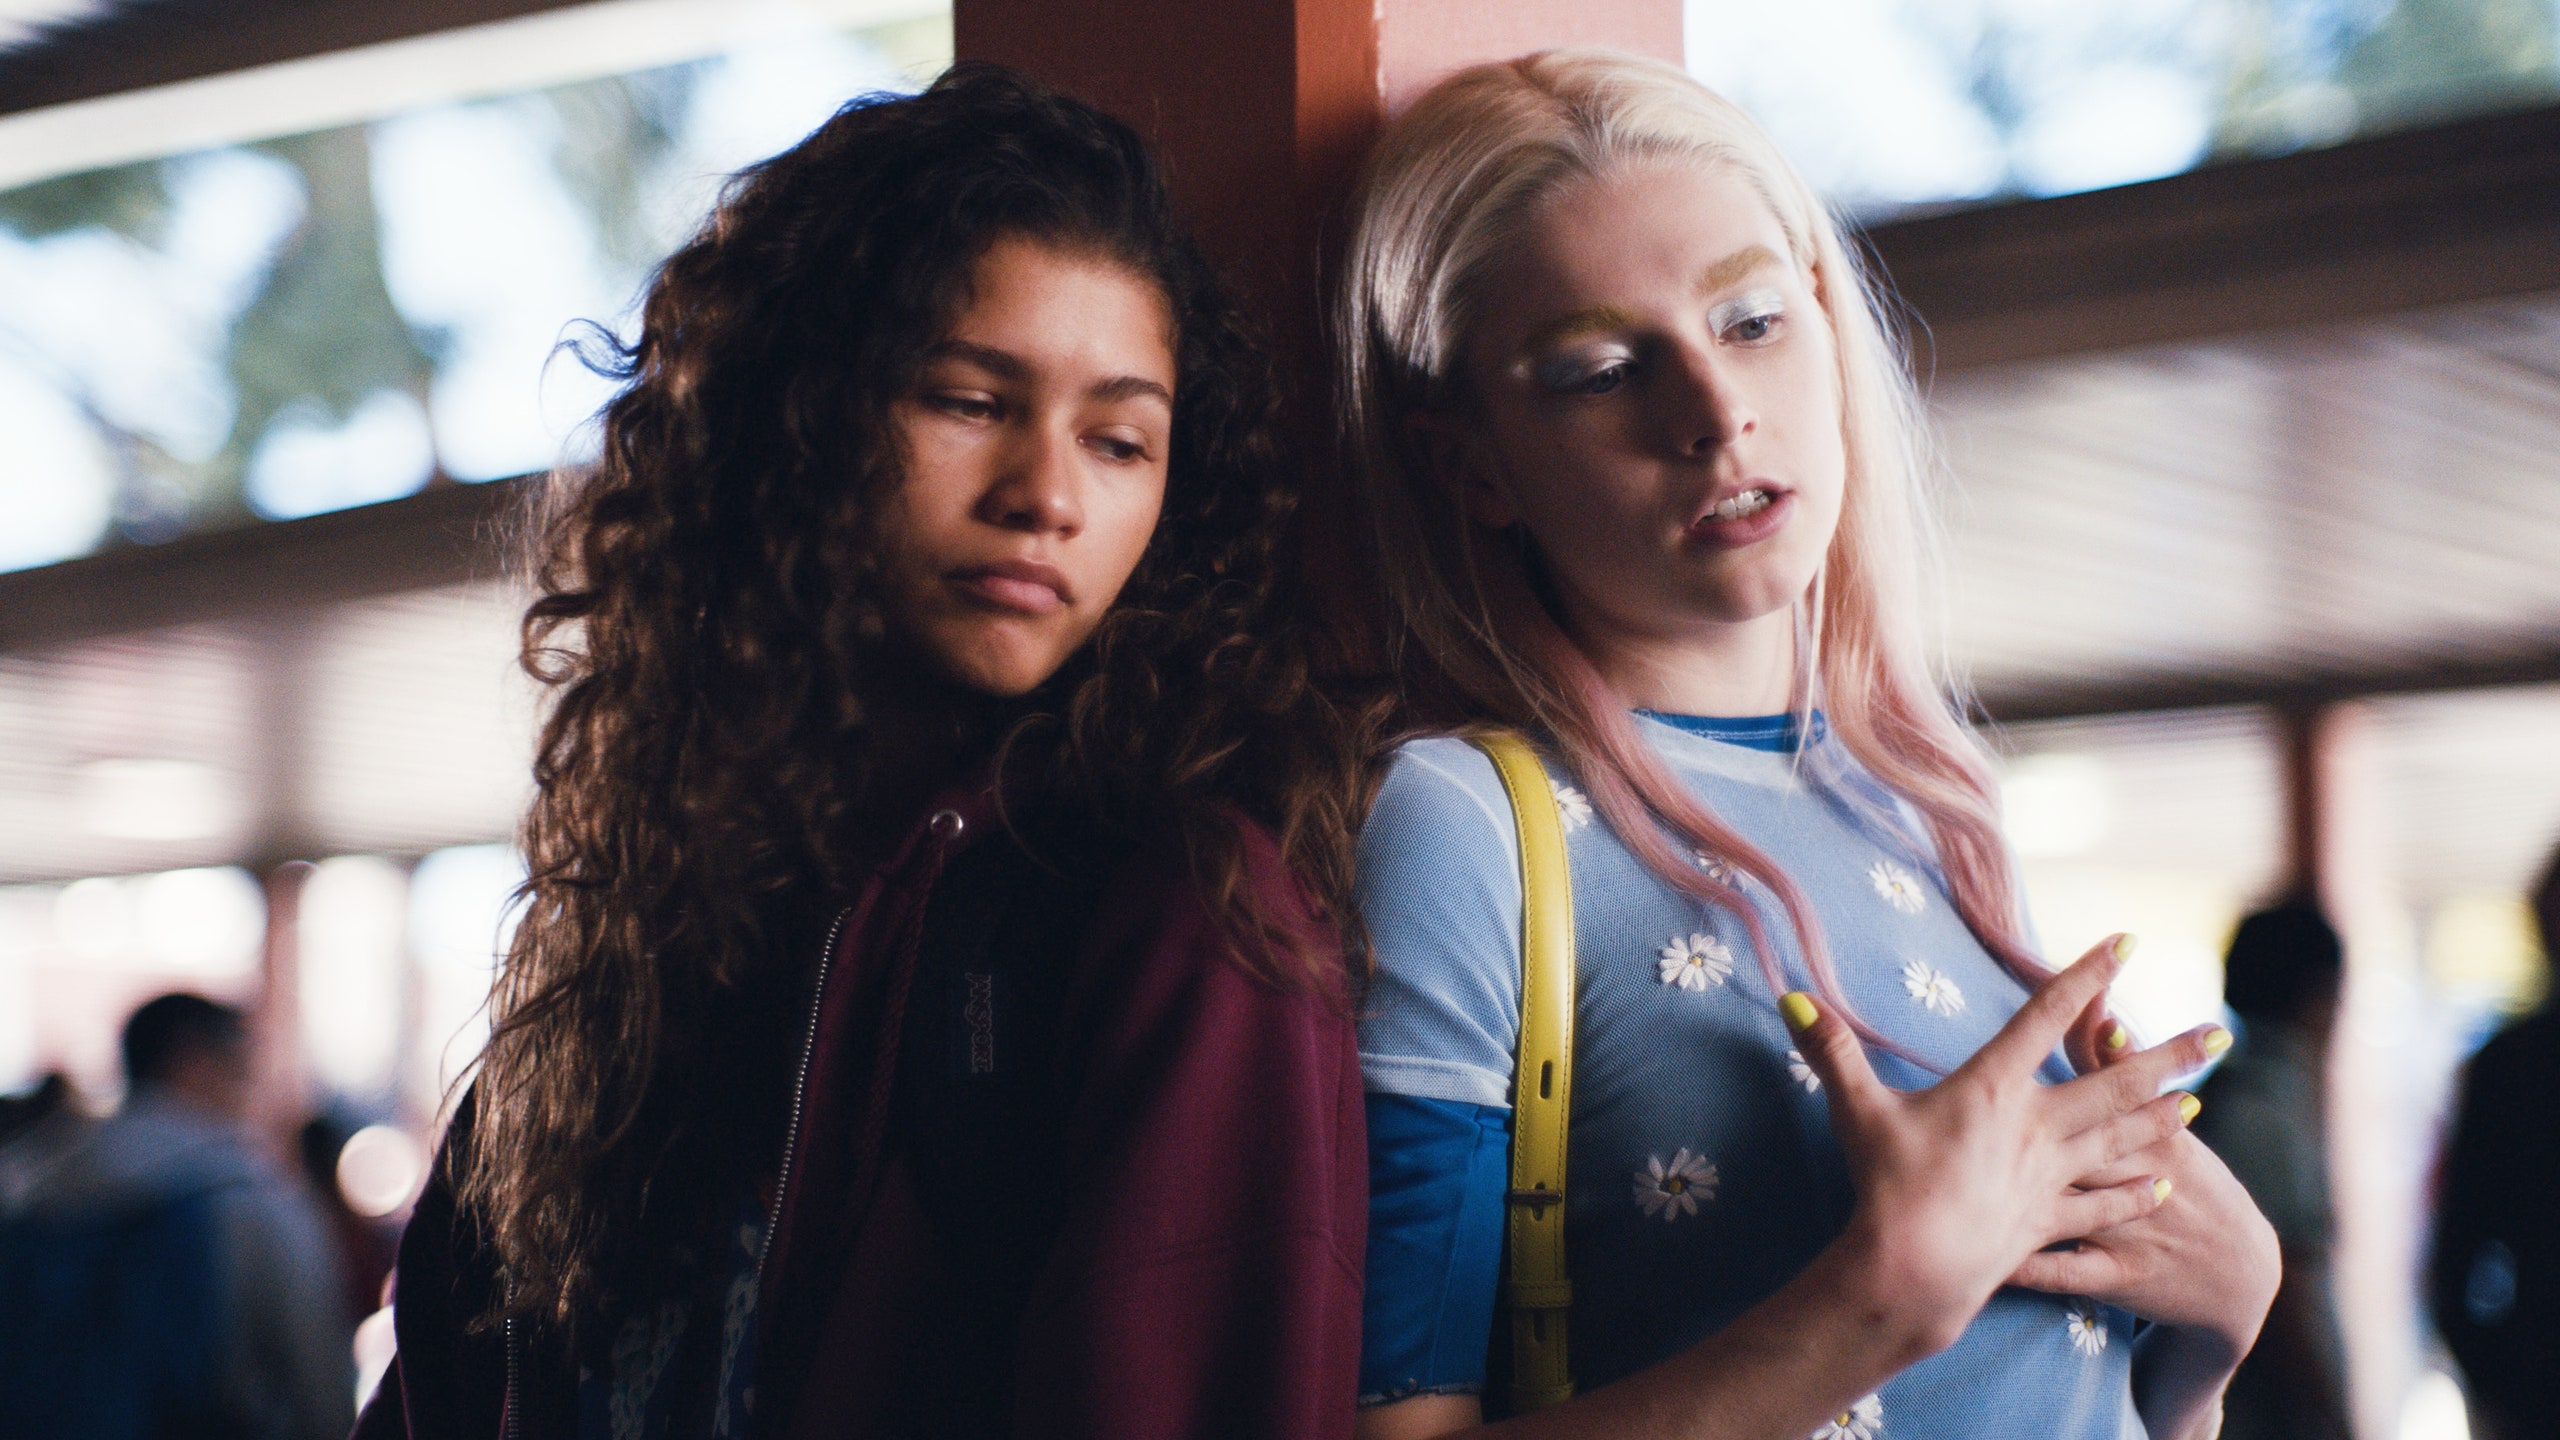 photo from the show Euphoria that is available to watch on Binge